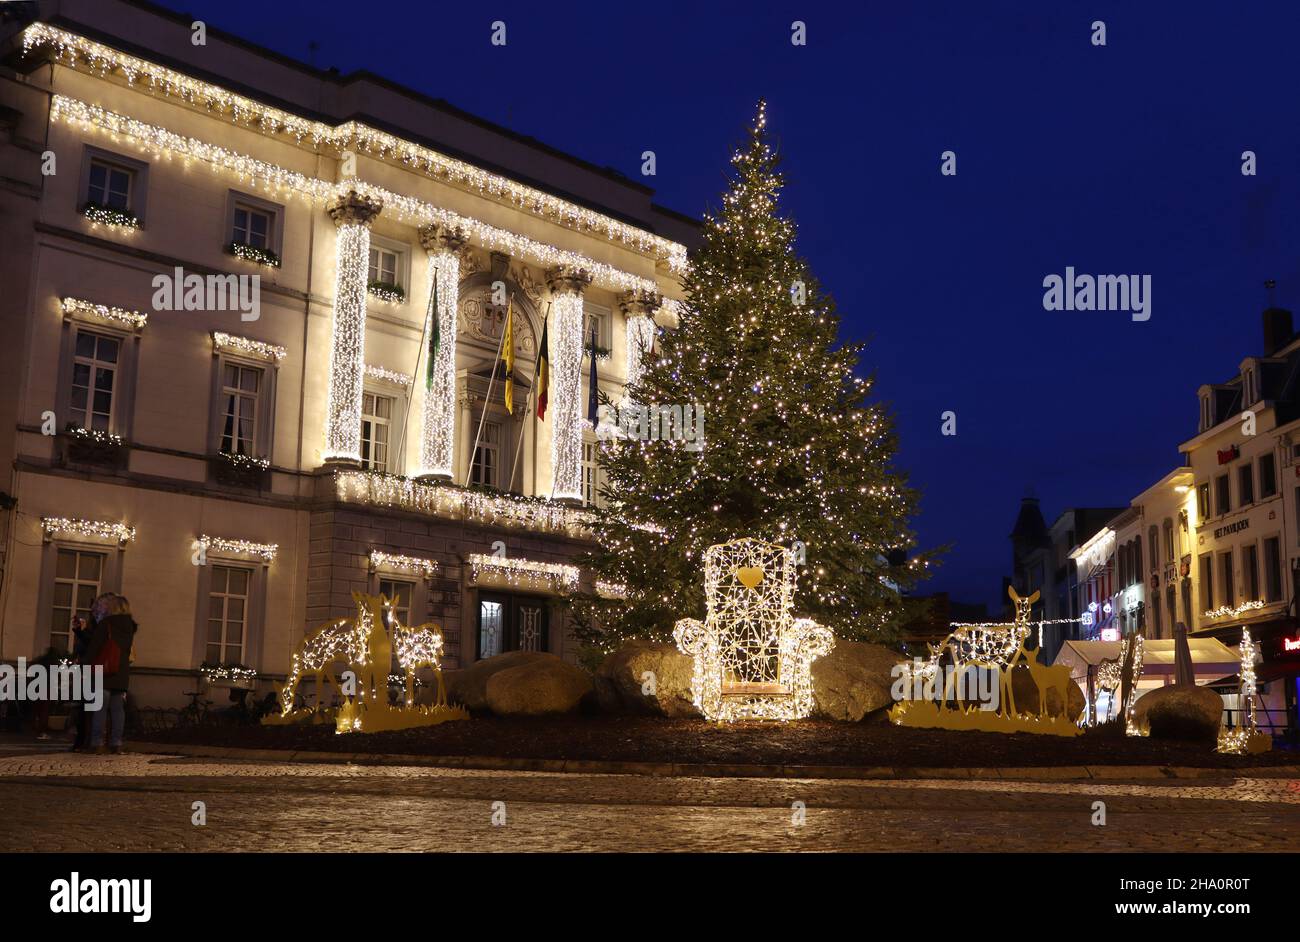 AALST, BELGIUM, 5 DECEMBER 2021: View of the main square during the holiday season, with a Christmas tree and illuminated old Town Hall in Aalst. Stock Photo